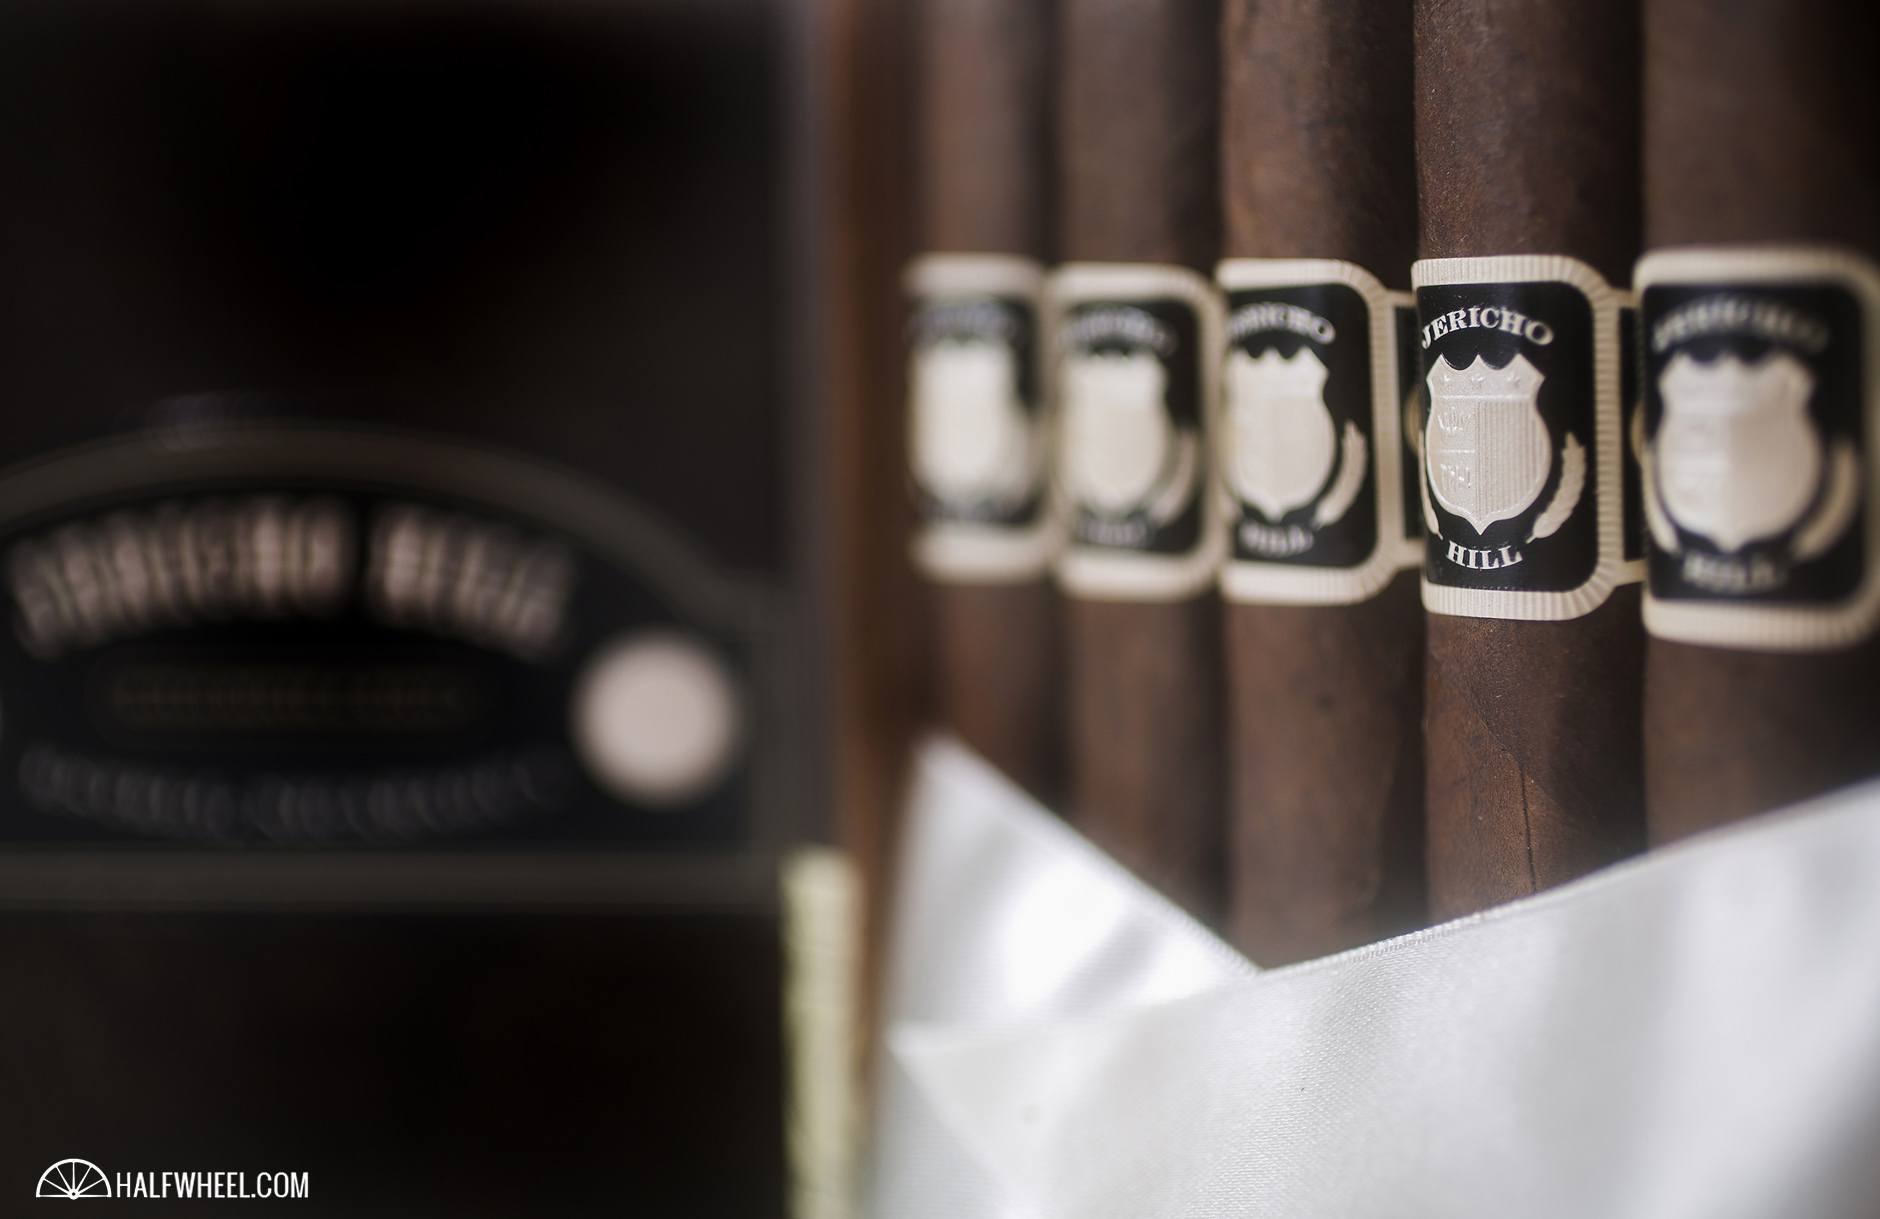 Jericho Hill Crowned Heads 2